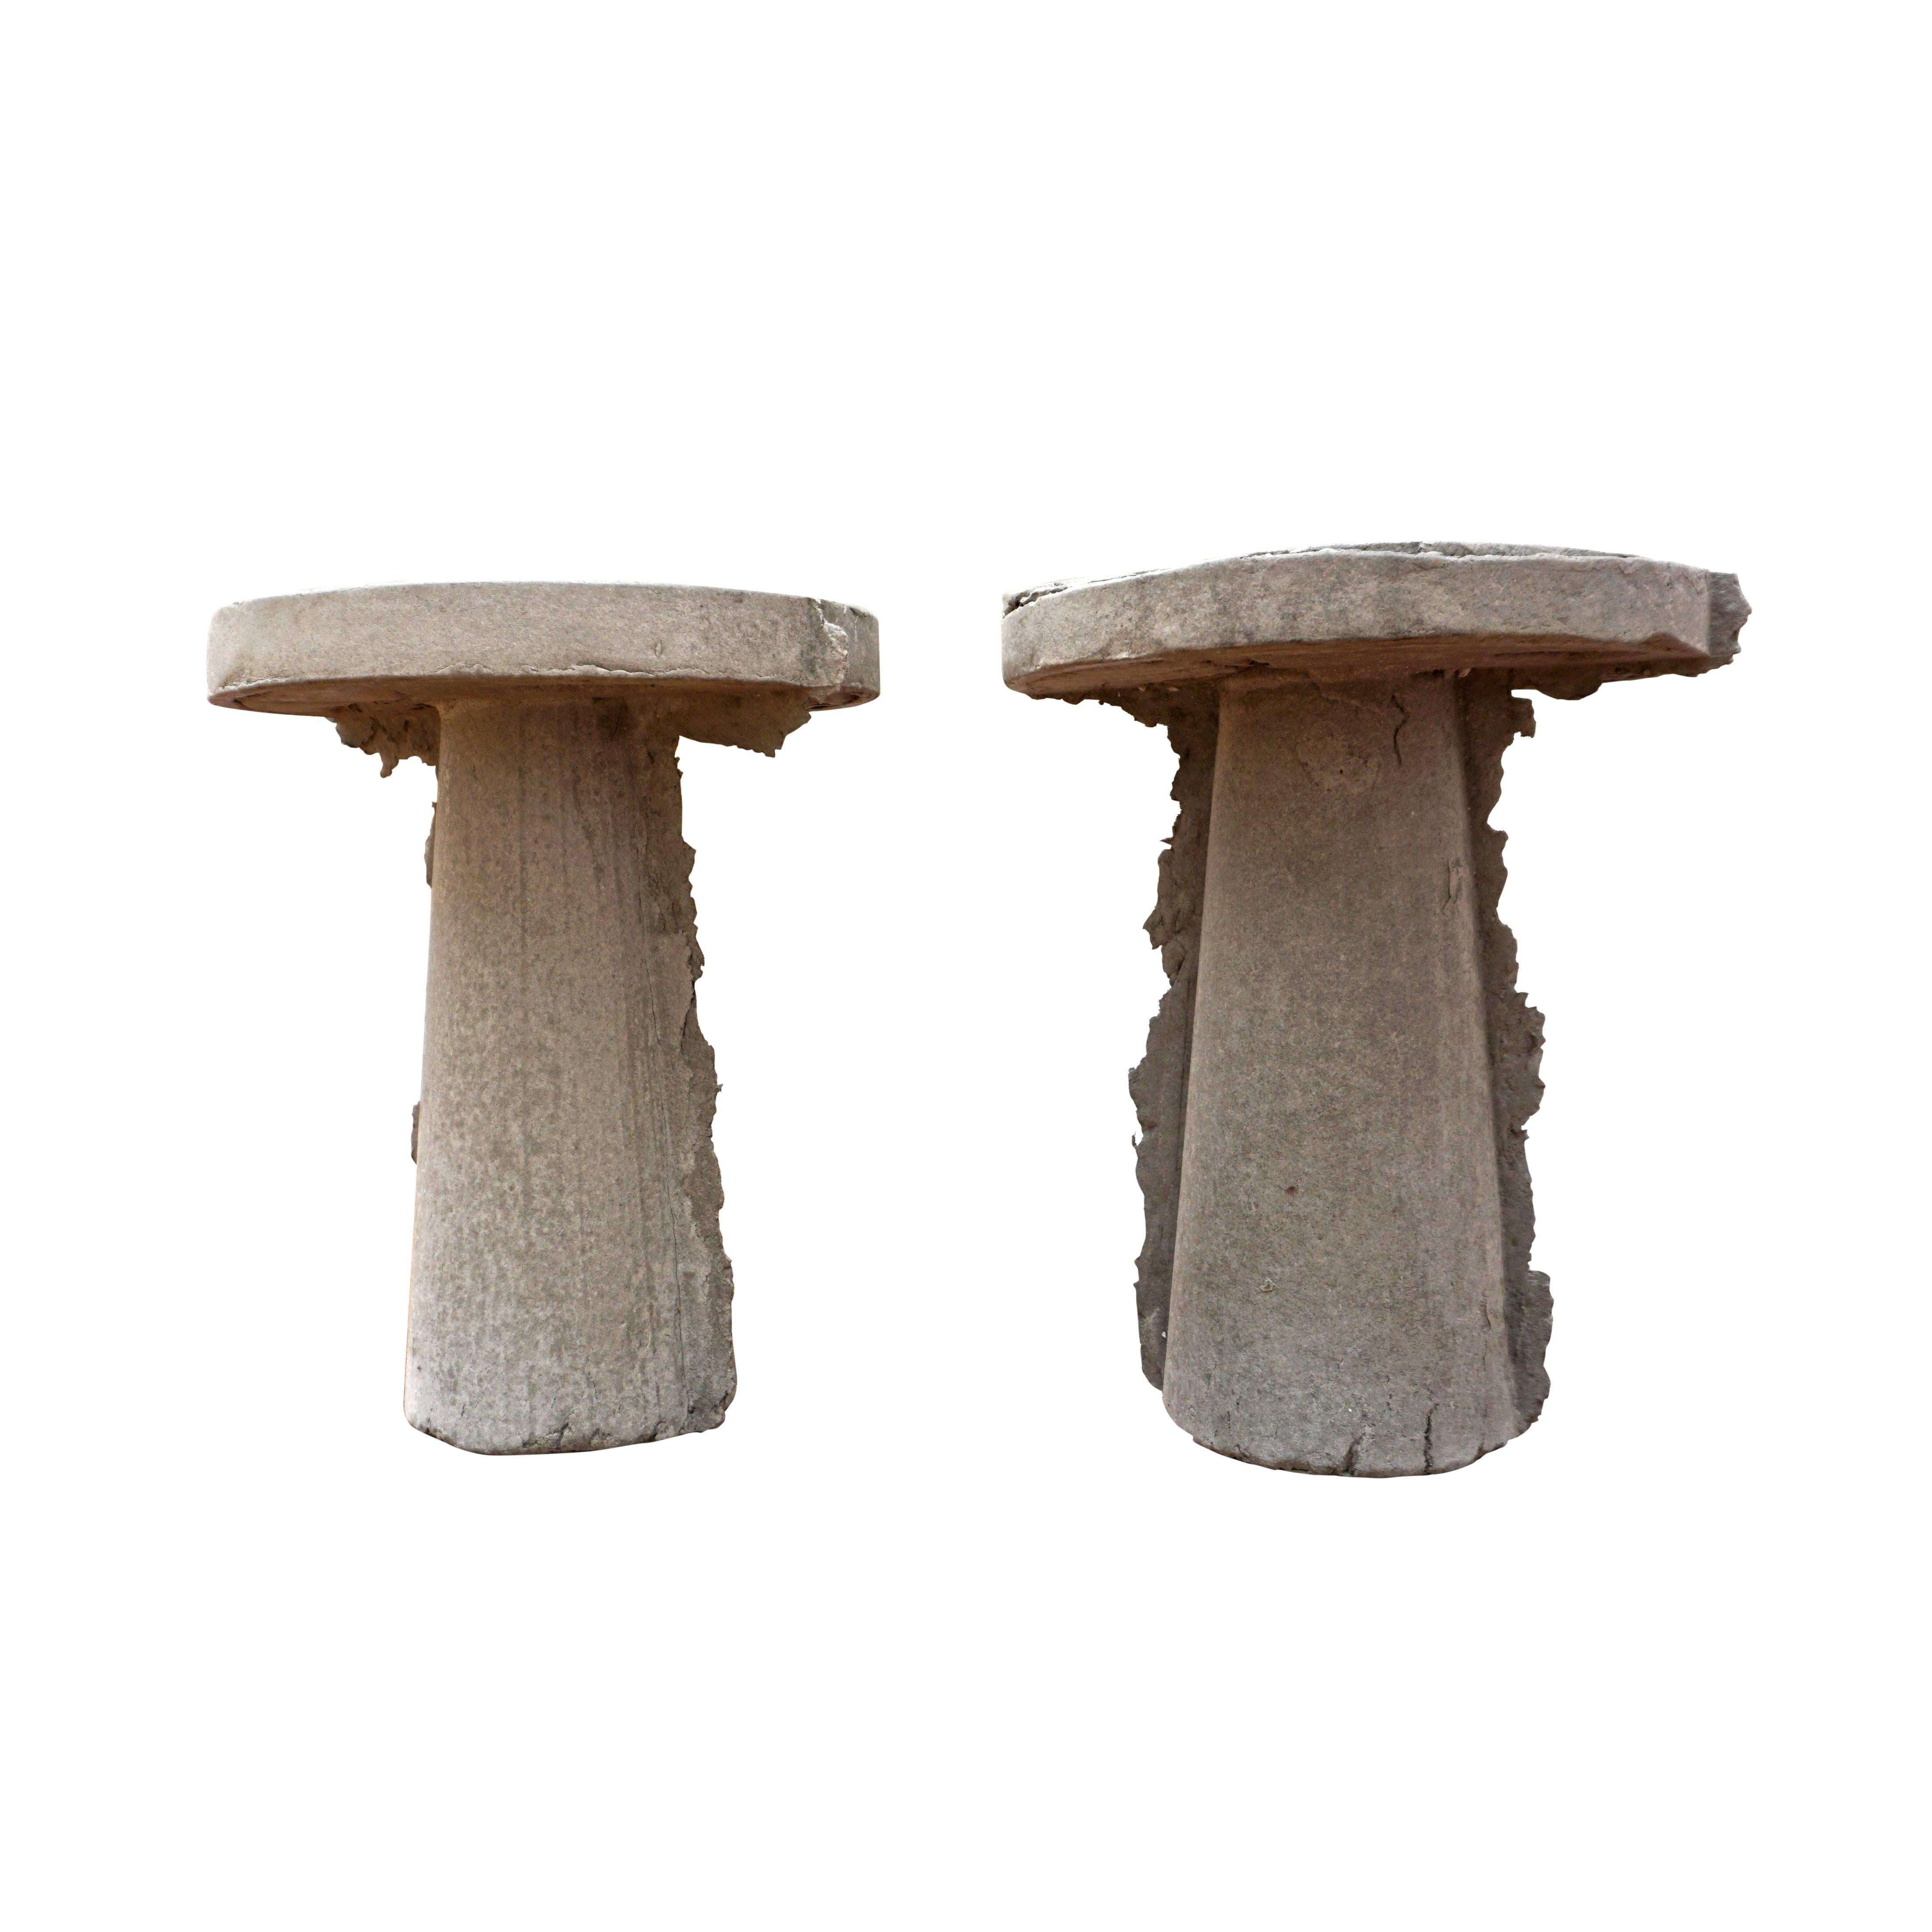 A pair of Slip stools by Nicolas Le Moigne, manufactured as an edition of 12 in association with ECAL.

Eternit concrete

Designed in 2008

Dimensions: Height 40 x 36 cm diameter.